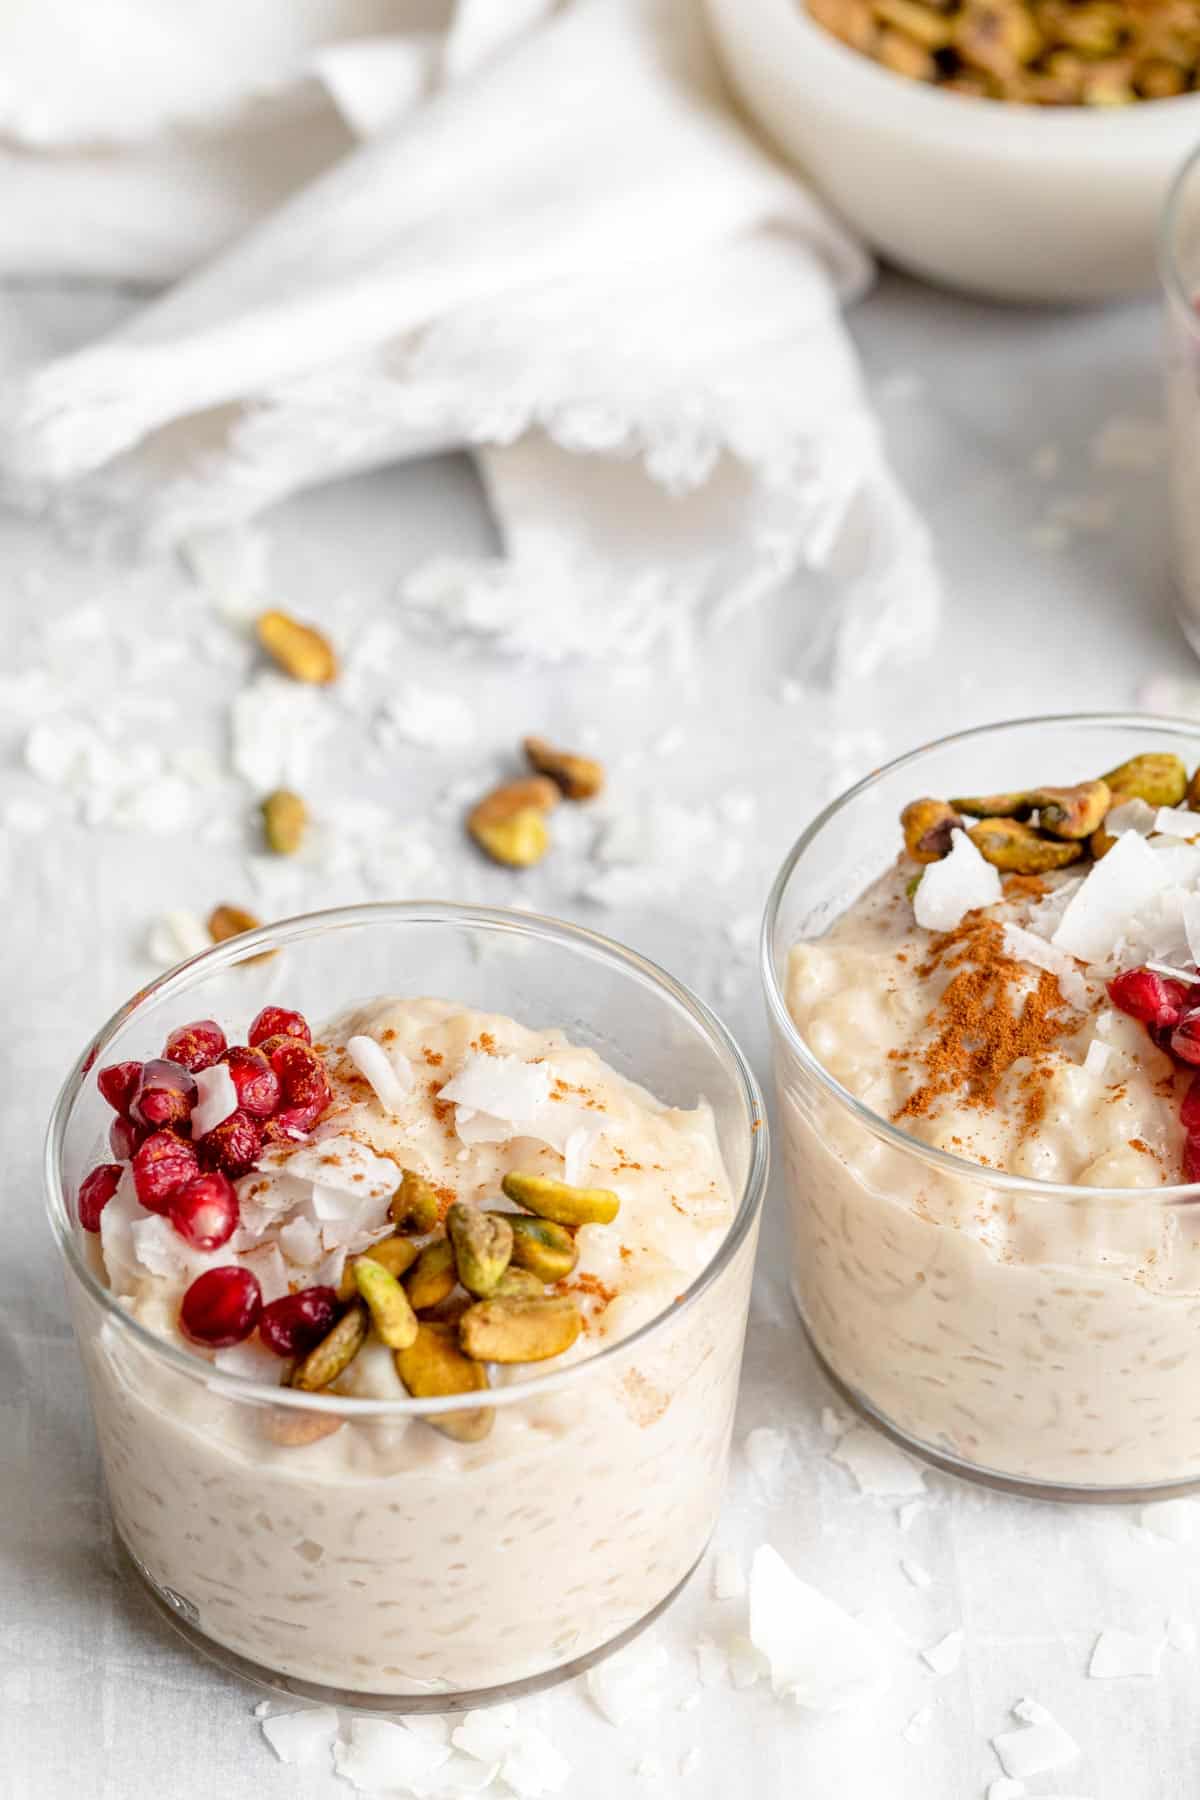 Angle show of the almond milk rice pudding jars with toppings